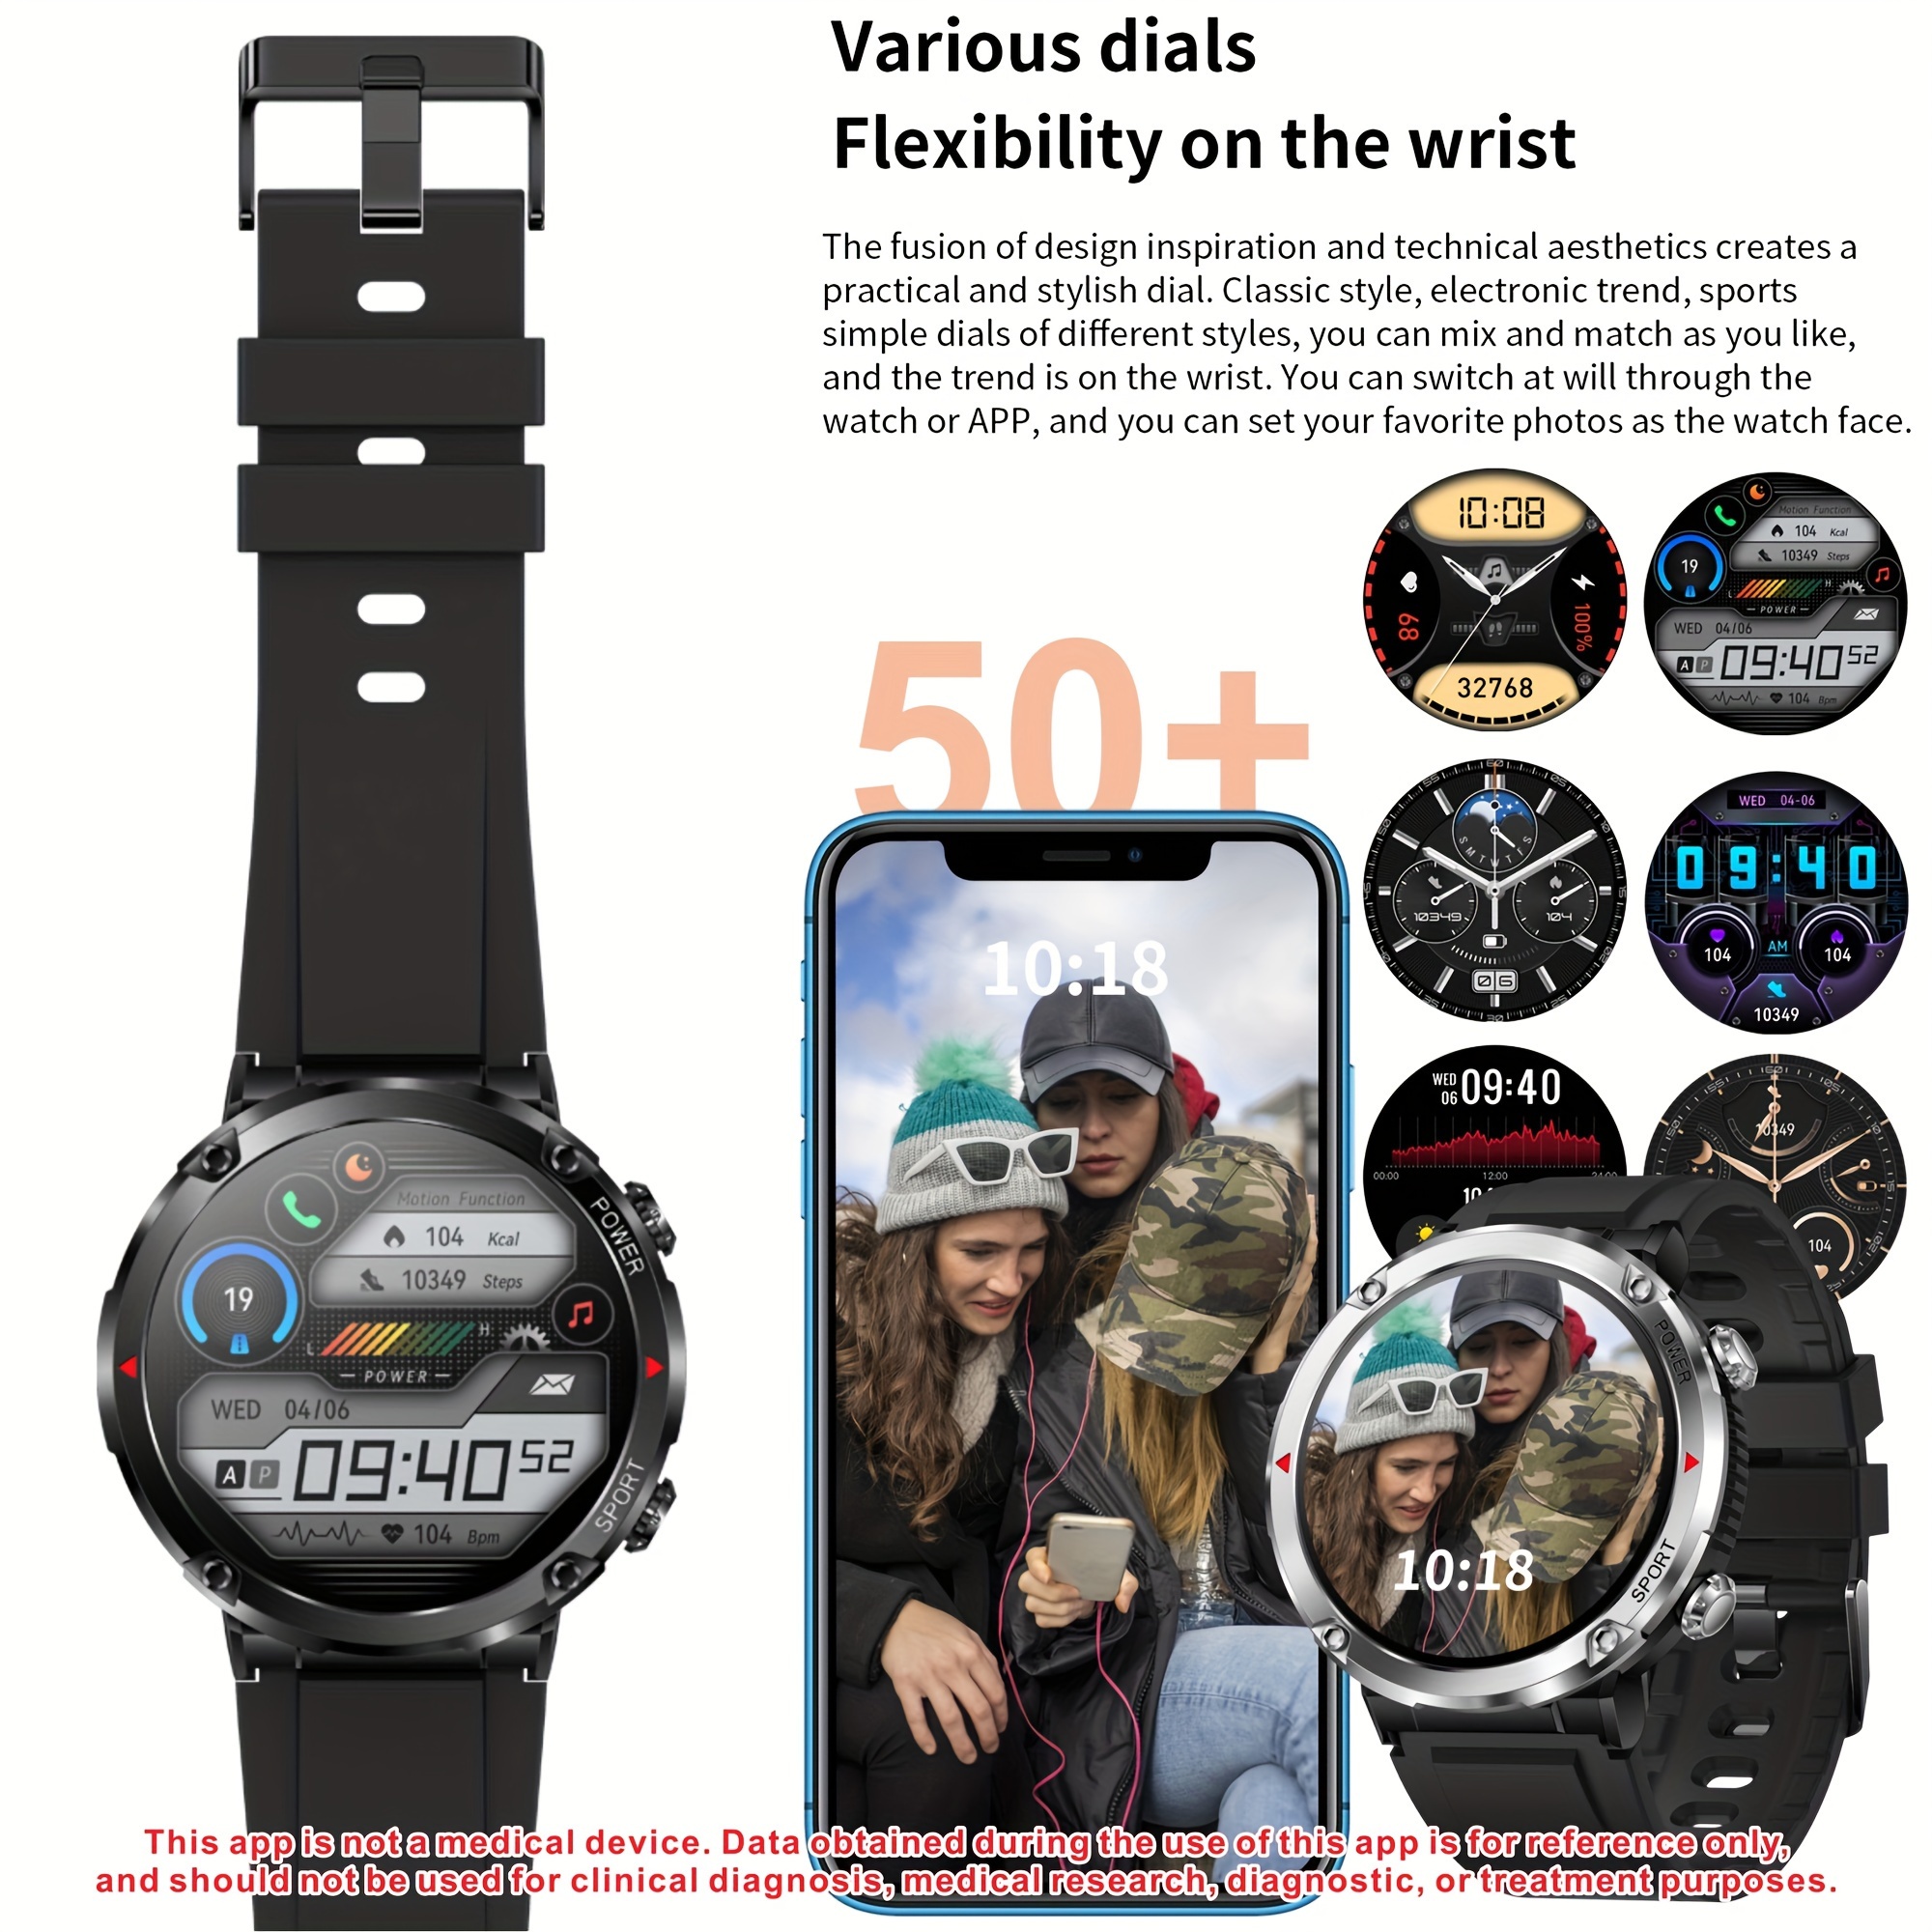 Men's Outdoor Sports Smartwatch Answering/making Calls, Suitable For IPhone And Android Phones, 1.6-inch Full Touch Screen, 600mAh Battery, Fitness Tracker